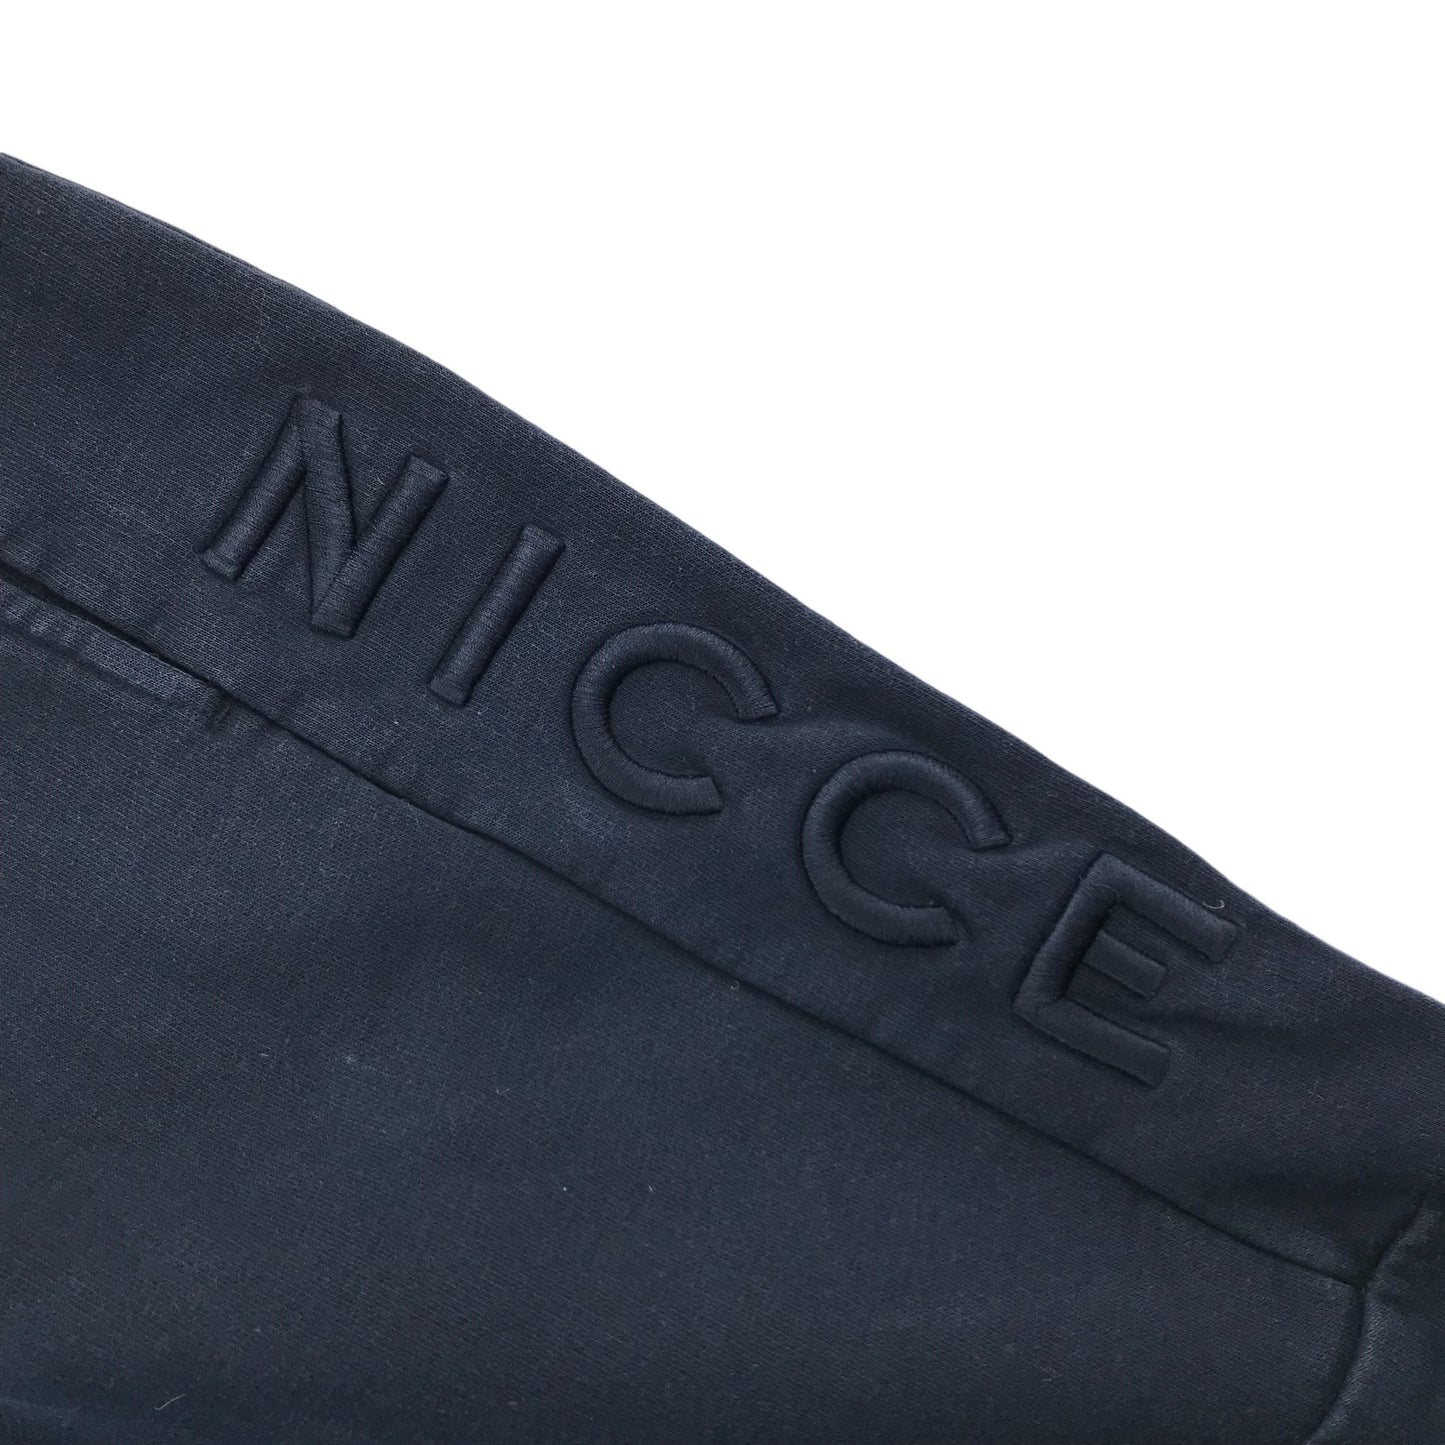 NICCE Joggers Size XS Navy Blue Plain with Embroidered Logo